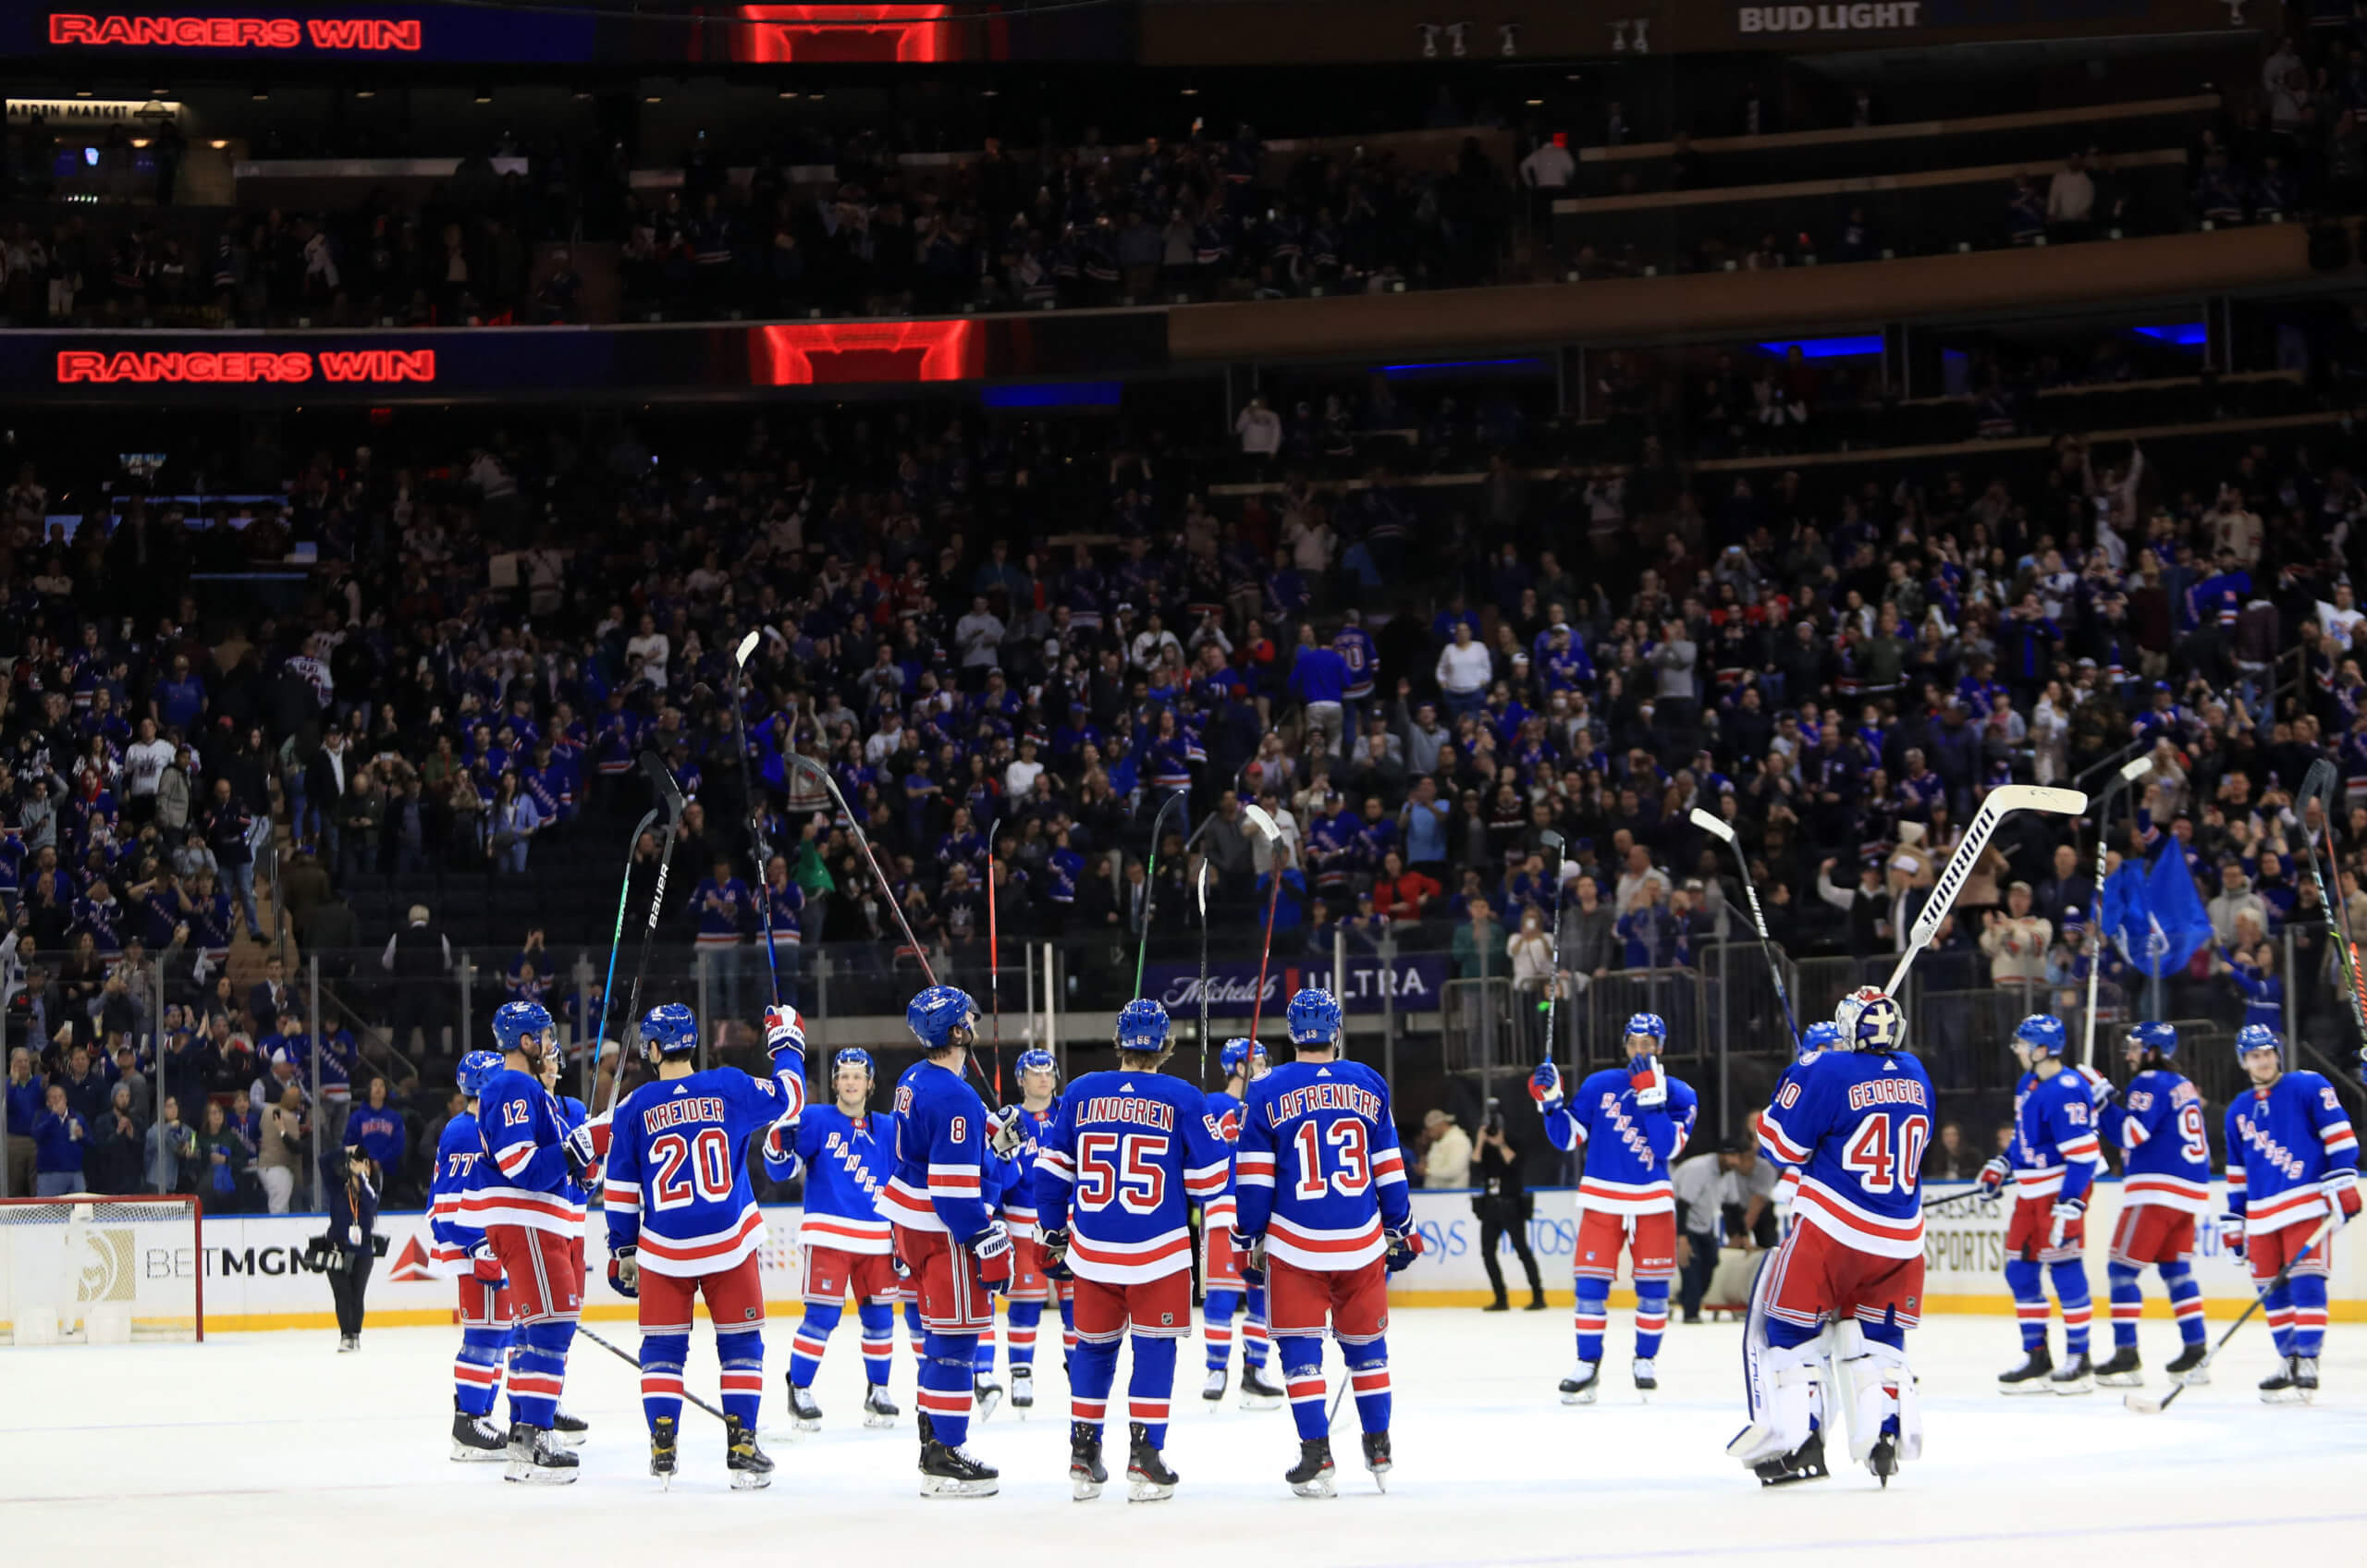 Playoff hockey finally returns to MSG after 5 years with New York Rangers  Cup chase